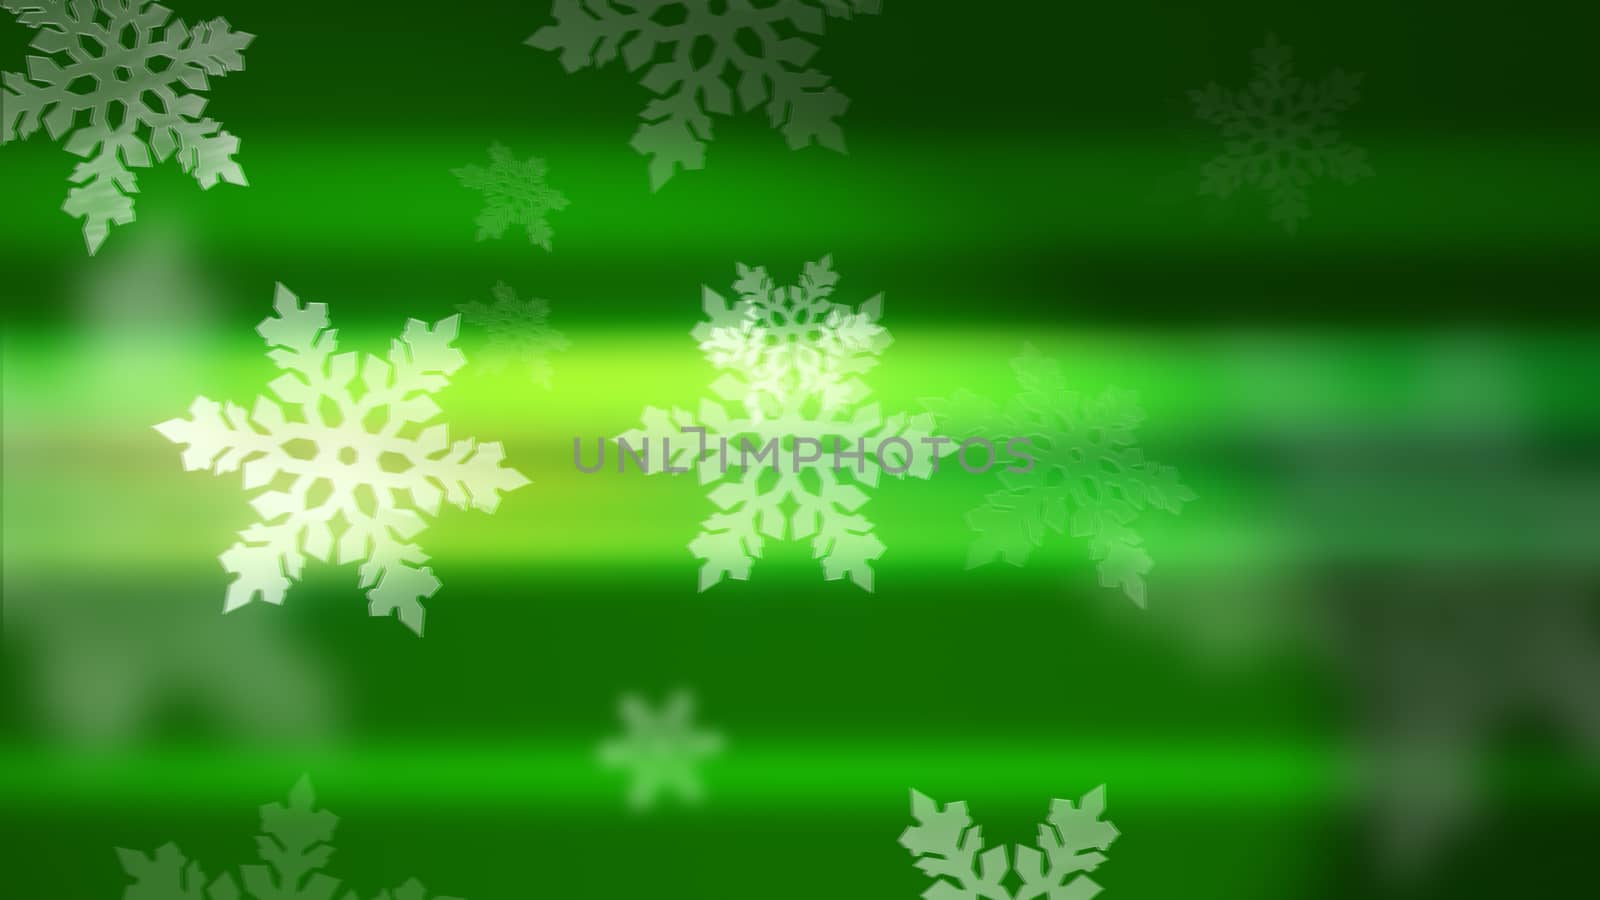 Merry Christmas and Happy New Year background by klss